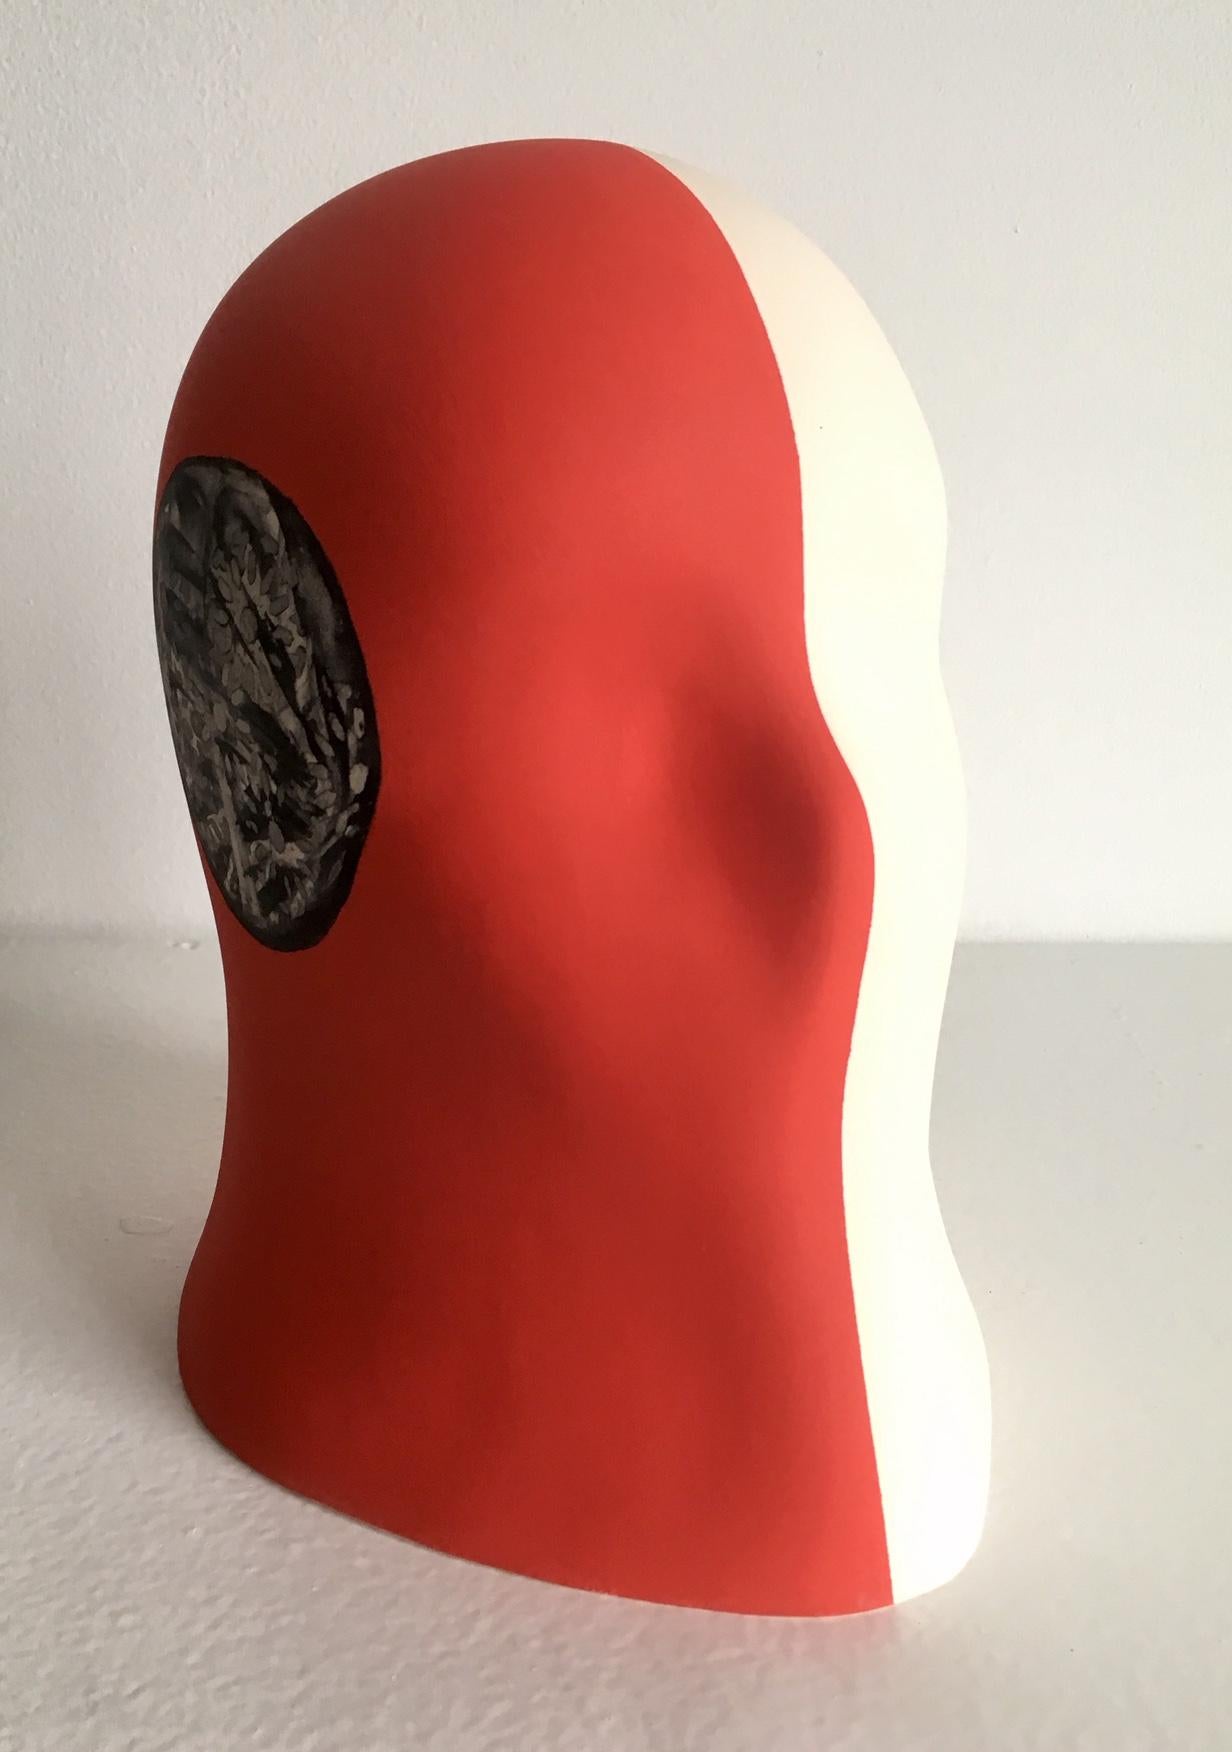 Chloe Rizzo, "Taking Flight Veil" Sculpture Porcelain, Glaze, Red White, Female/Woman

"Taking Flight Veil" is a ceramic/porcelain glaze sculpture from a series by artist Chloe Rizzo.  Her "Veil Series" depicts a female head veiled by an overall